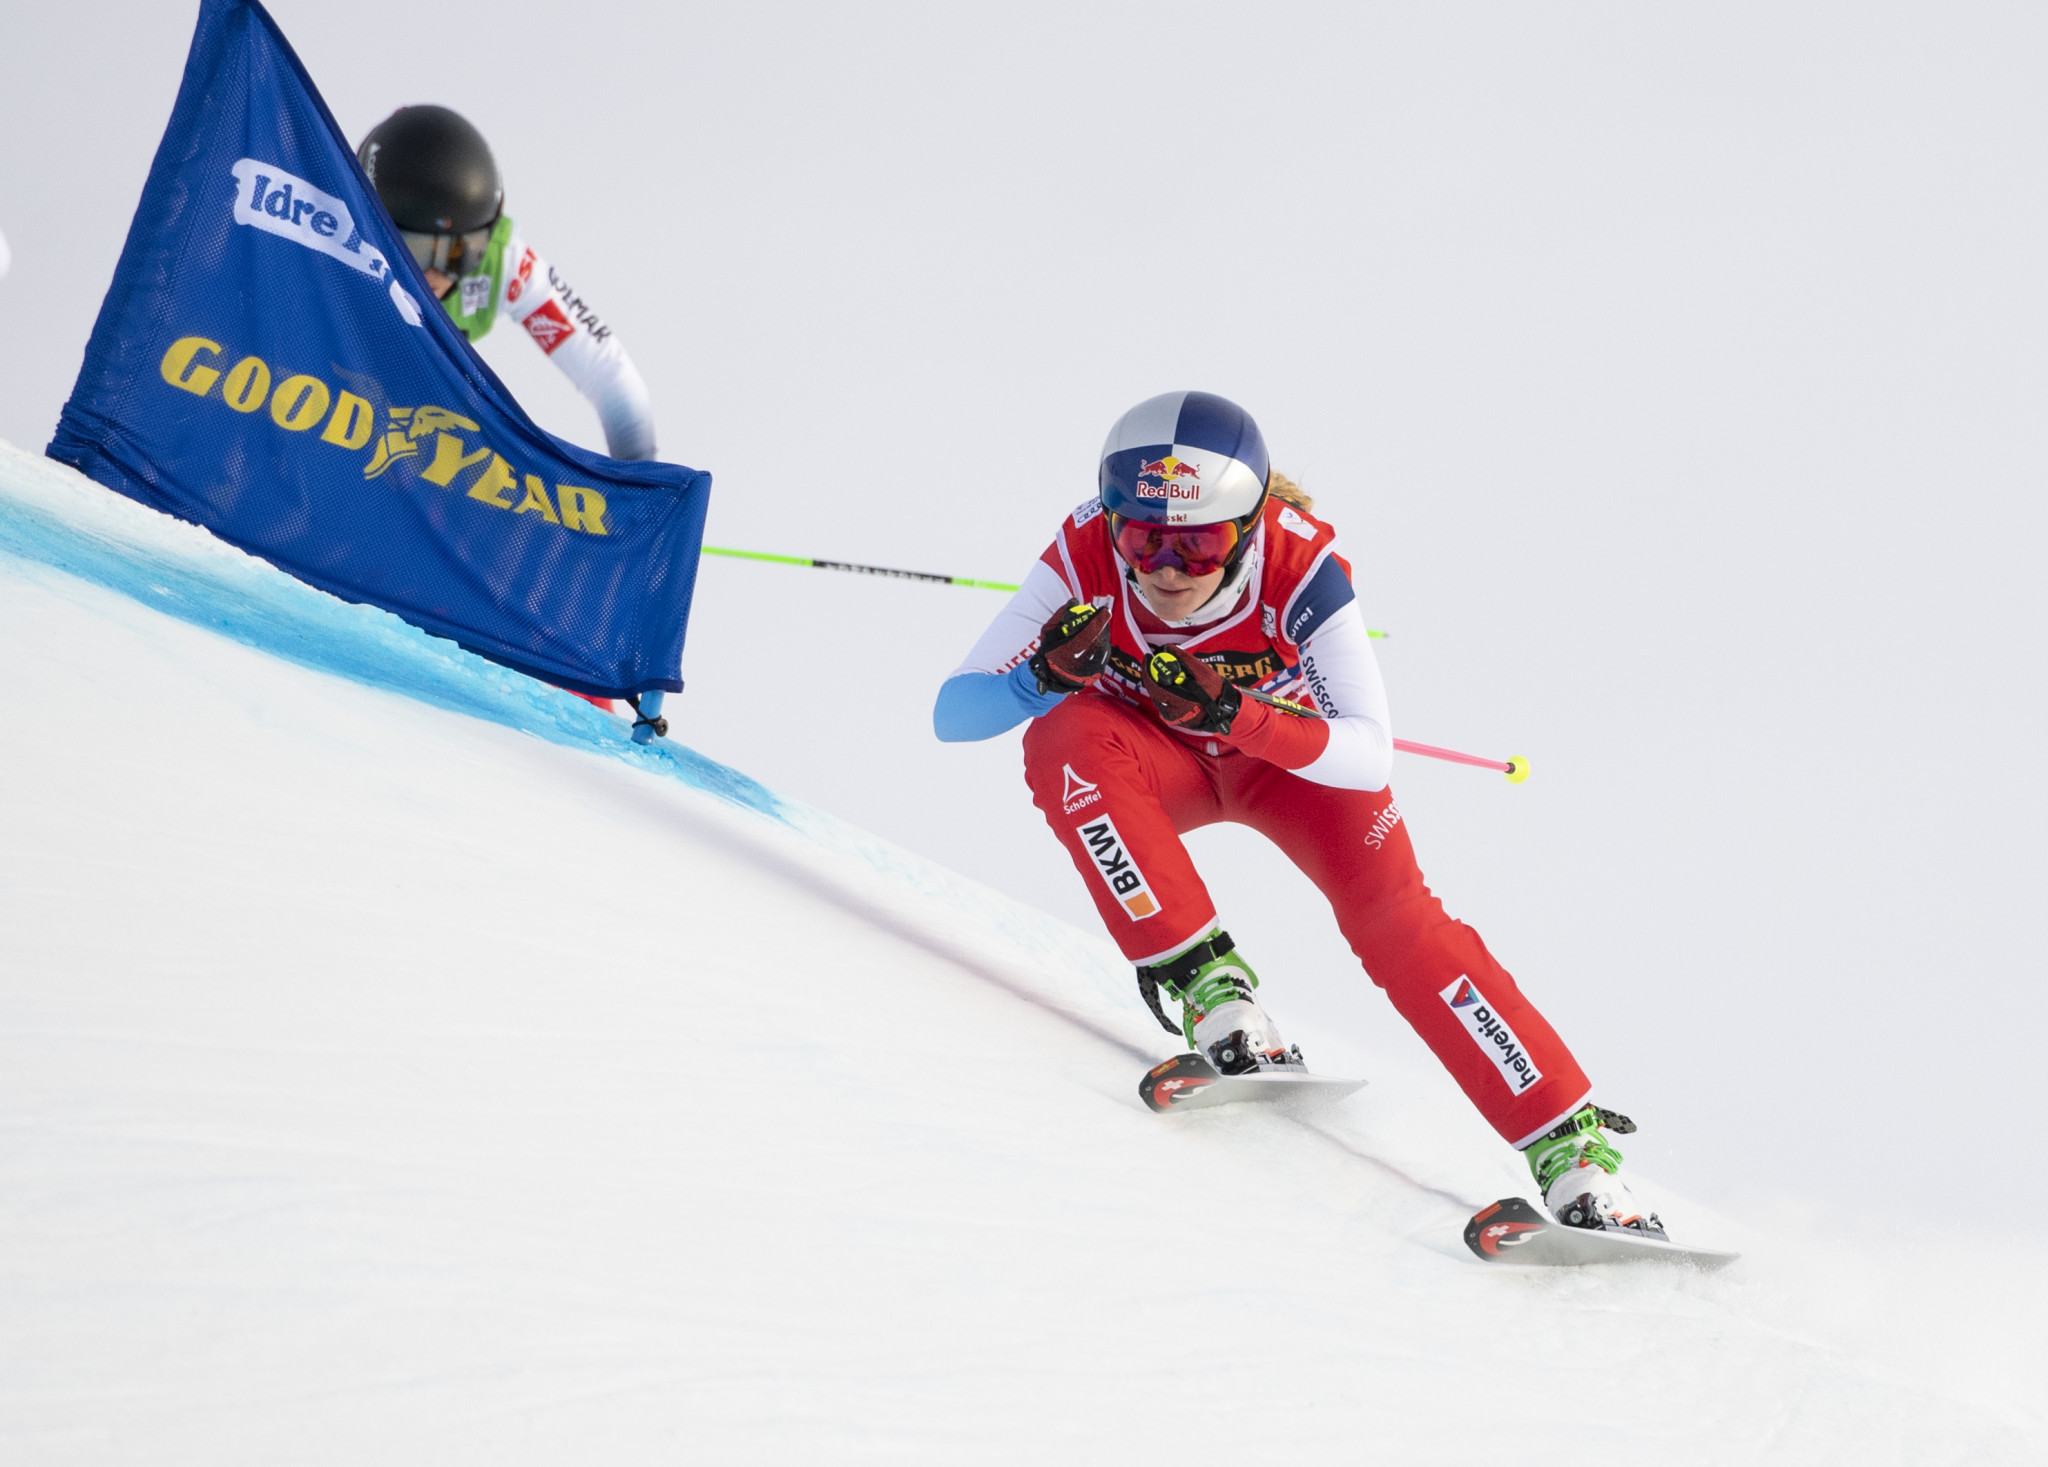 Smith targets further FIS Ski Cross World Cup success in Sunny Valley